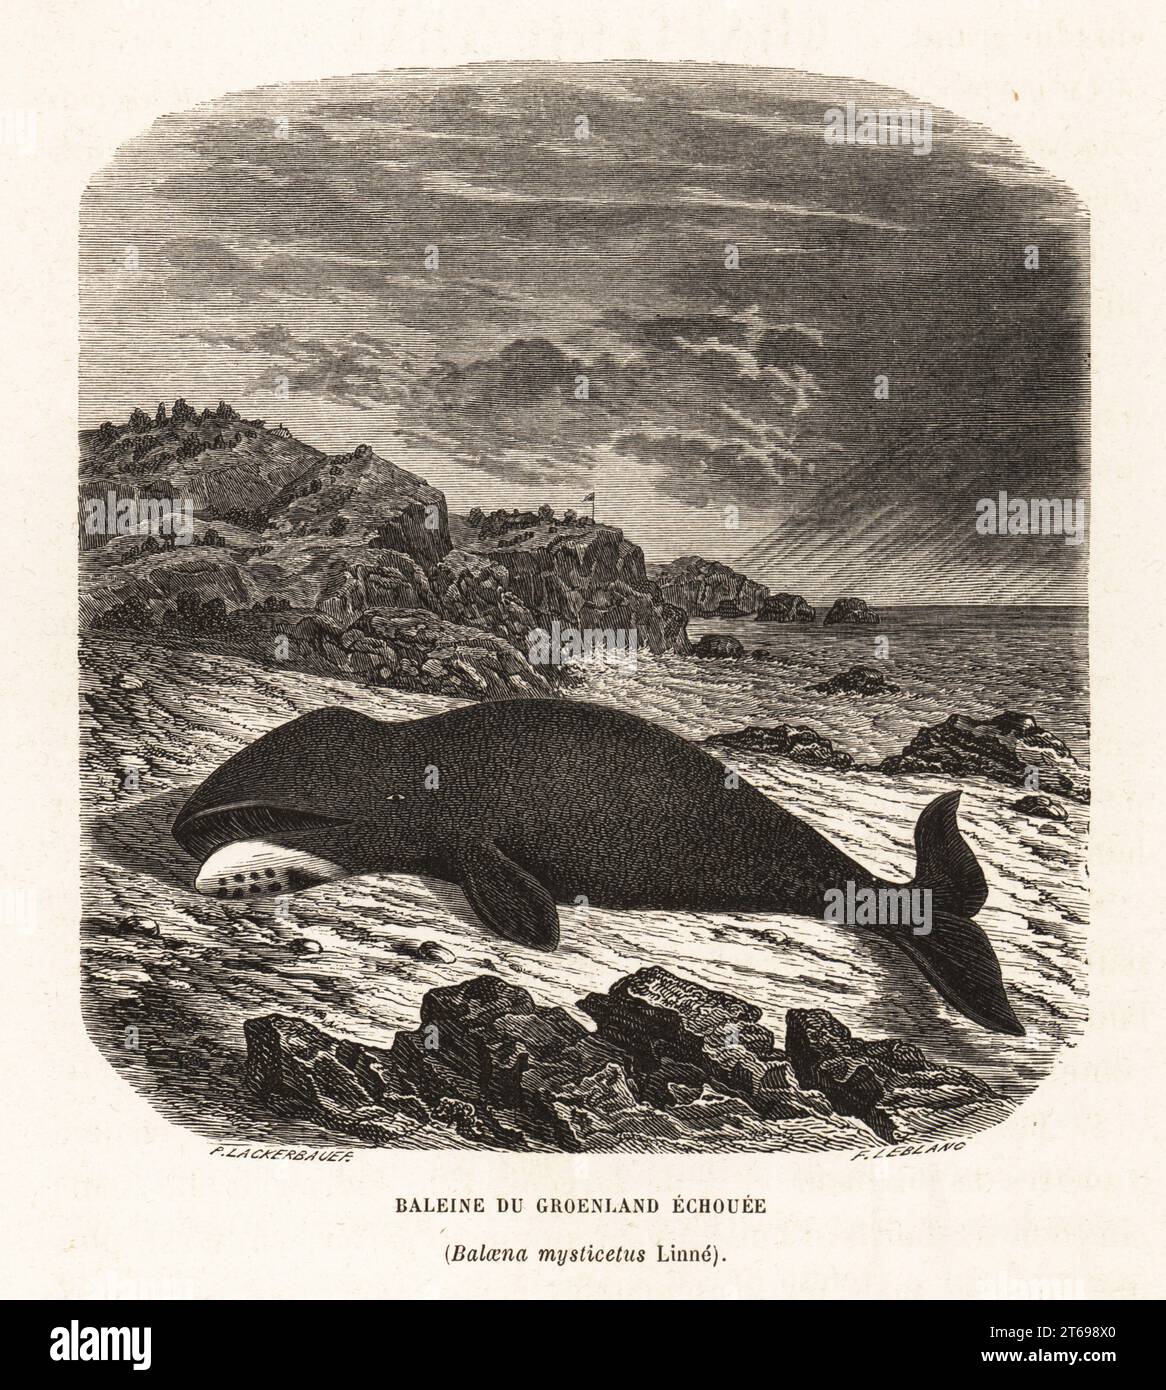 Bowhead whale, Balaena mysticetus, beached on a rocky shore. Baleine du Groenland echouee. Woodcut by F. Leblanc after Pierre Lackerbauer from Alfred Fredols Le Monde de la Mer, the World of the Sea, edited by Olivier Fredol, Librairie Hachette et. Cie., Paris, 1881. Alfred Fredol was the pseudonym of French zoologist and botanist Alfred Moquin-Tandon, 1804-1863. Stock Photo